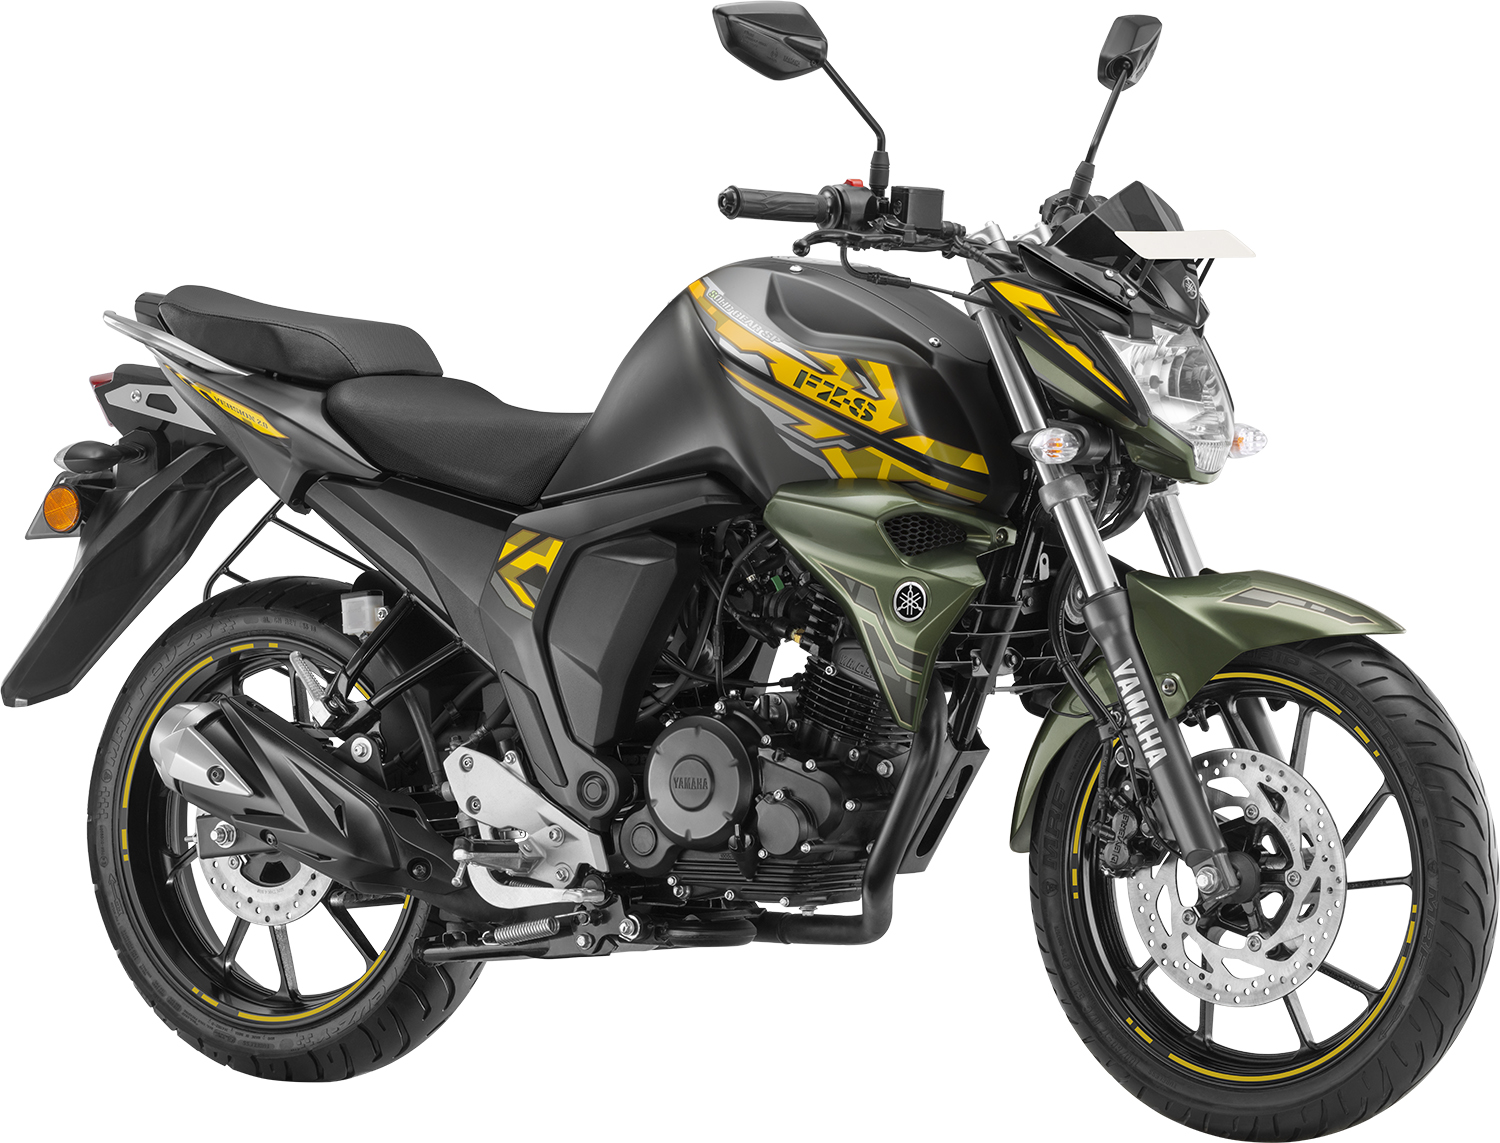 Yamaha FZS FI rear disc variant with new colours launched at INR 87,042